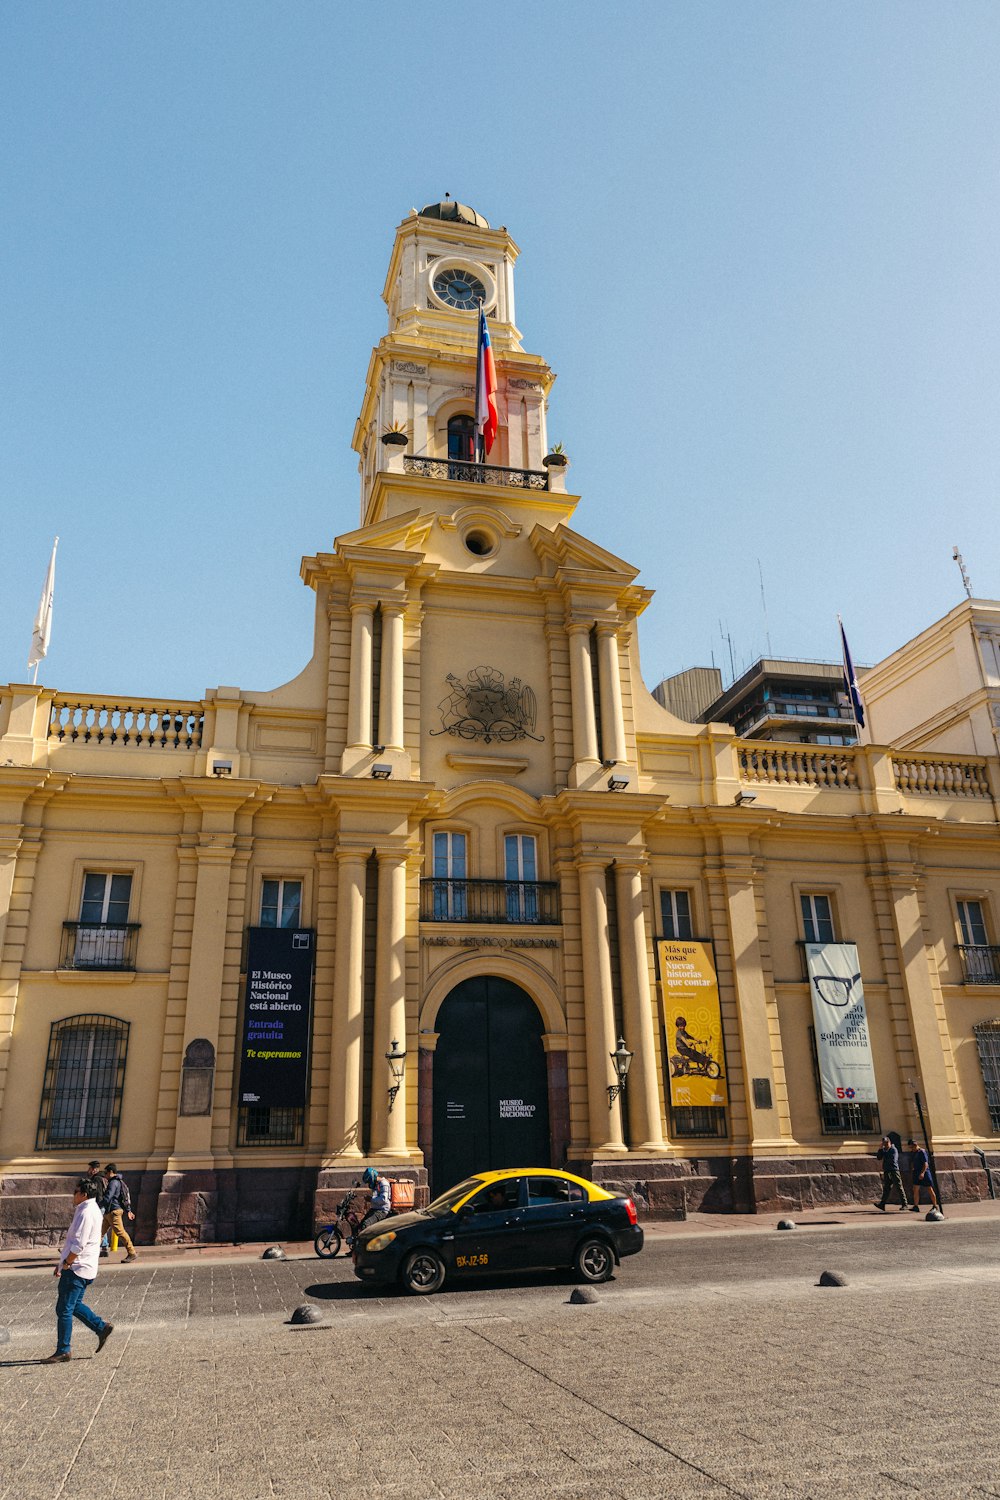 a large yellow building with a clock tower